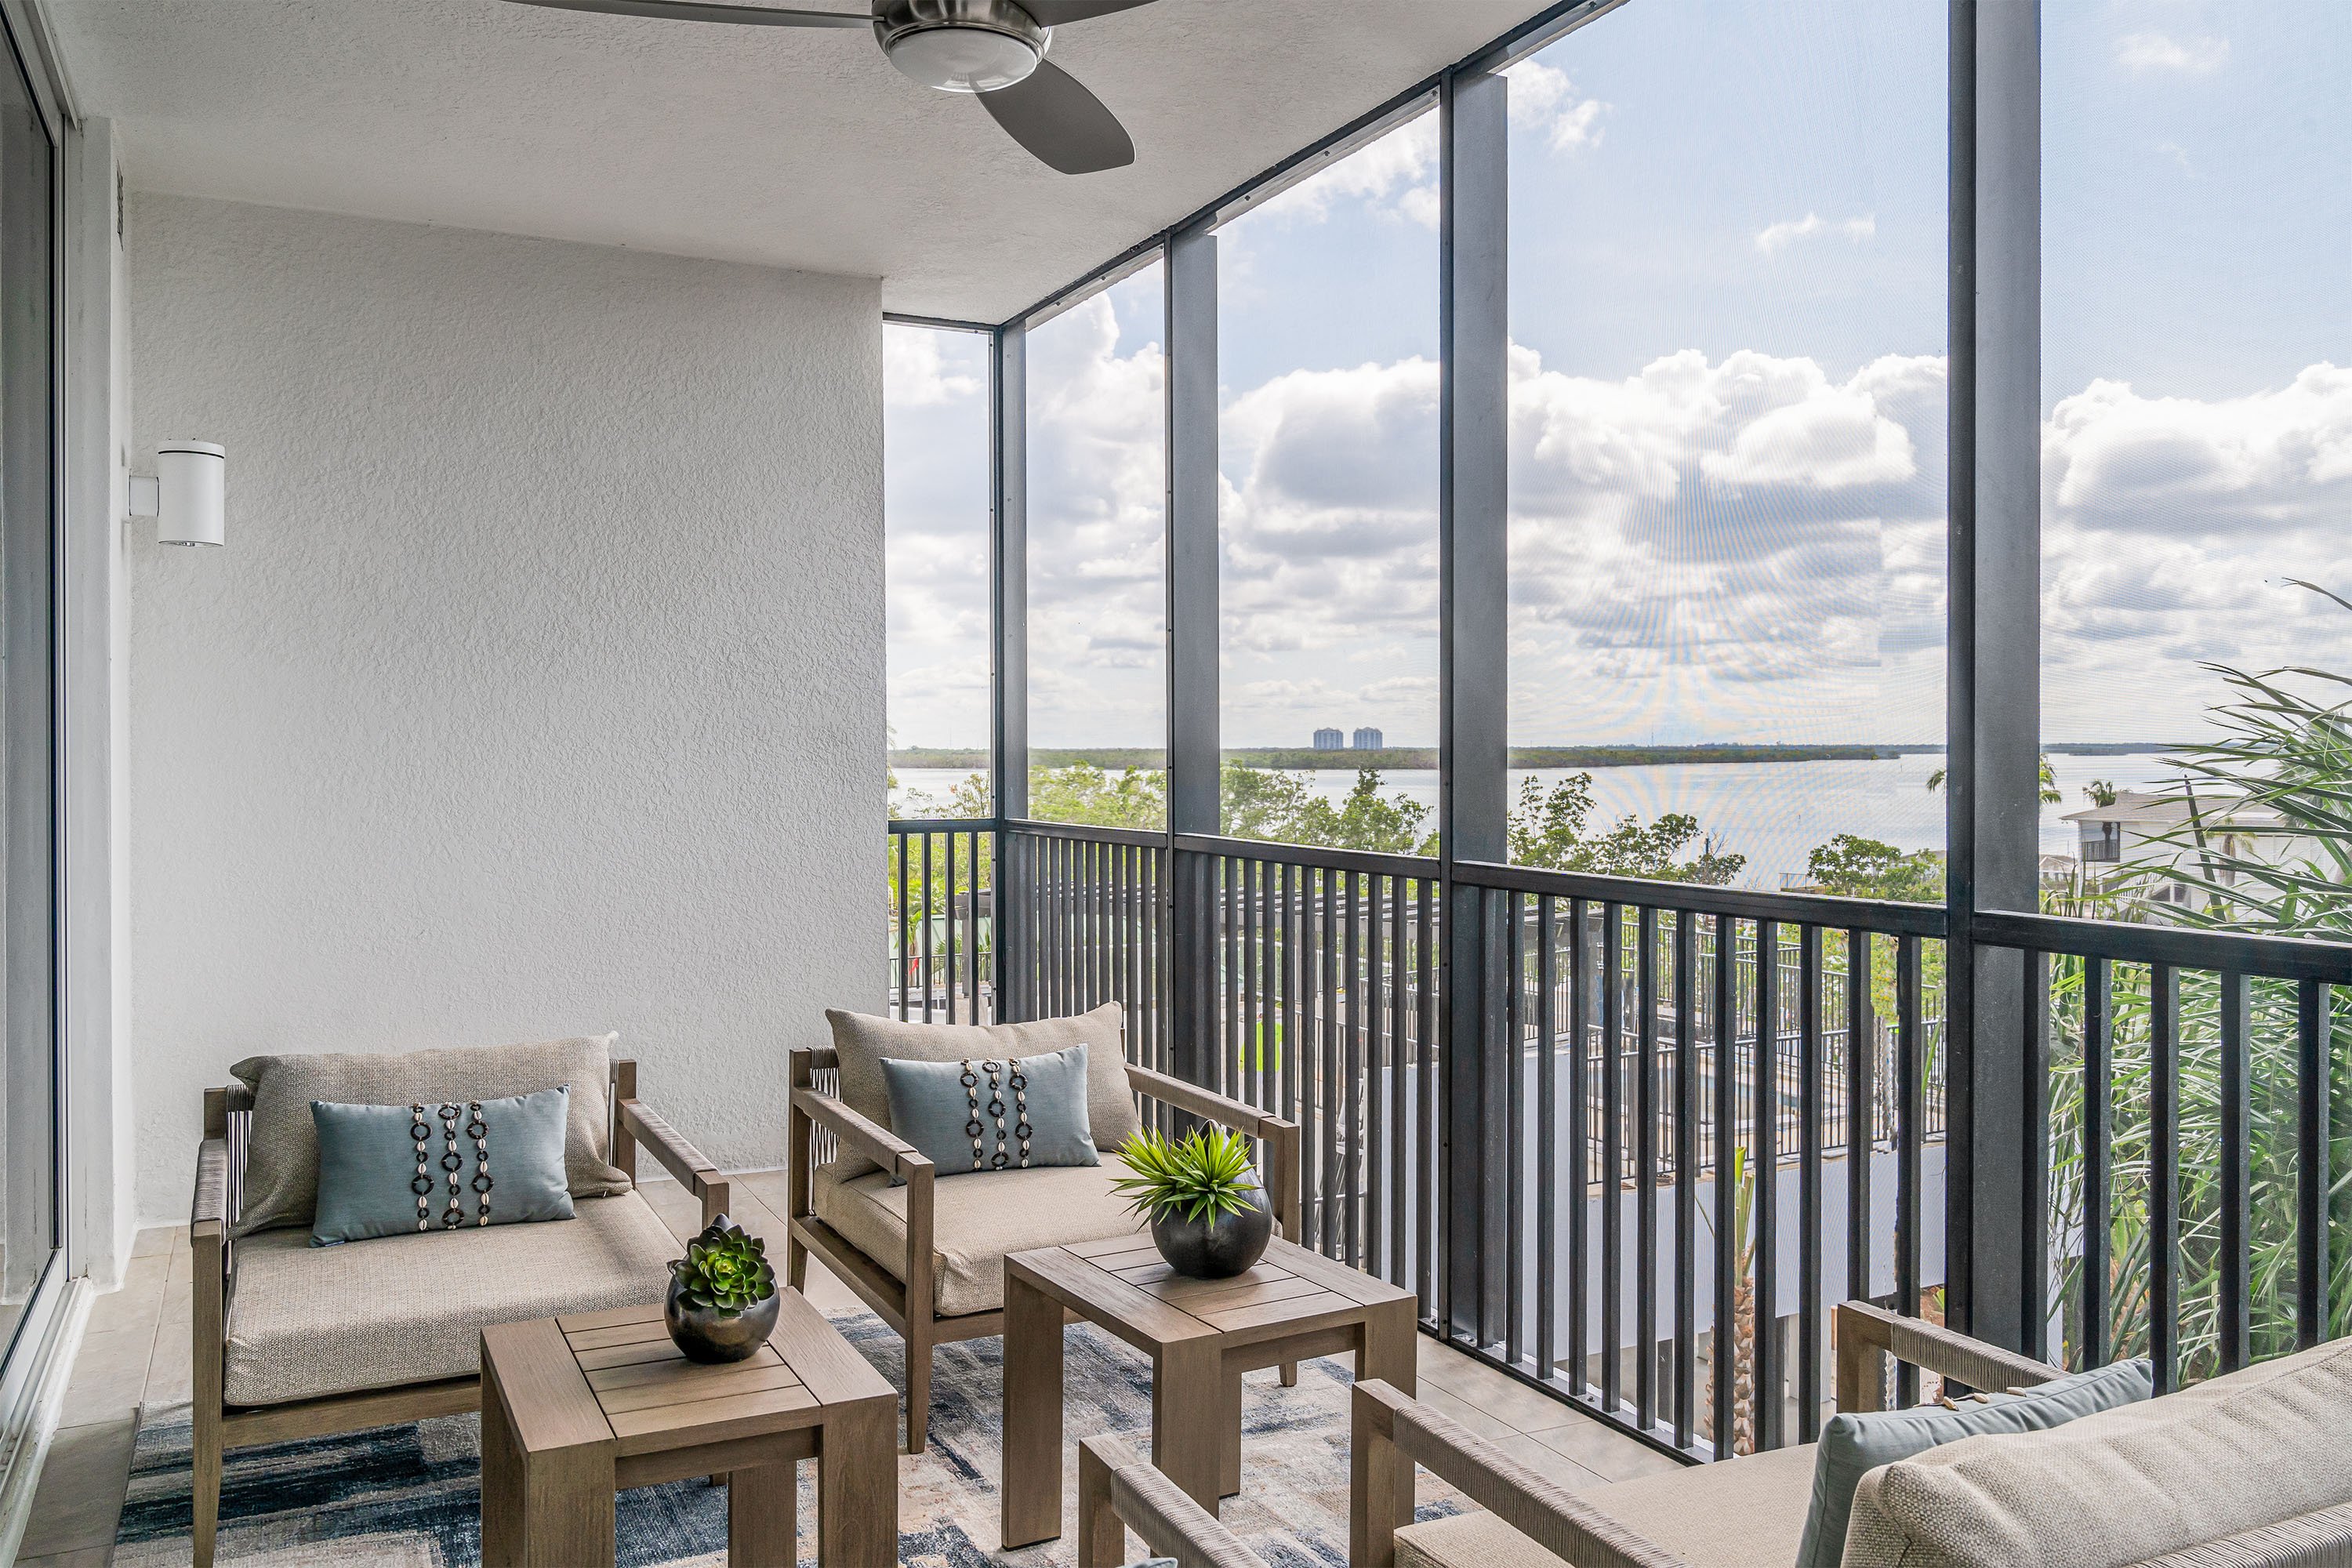 Grandview’s Elegant Island Contemporary Architecture Suits Sophisticated Fort Myers Beach Condos